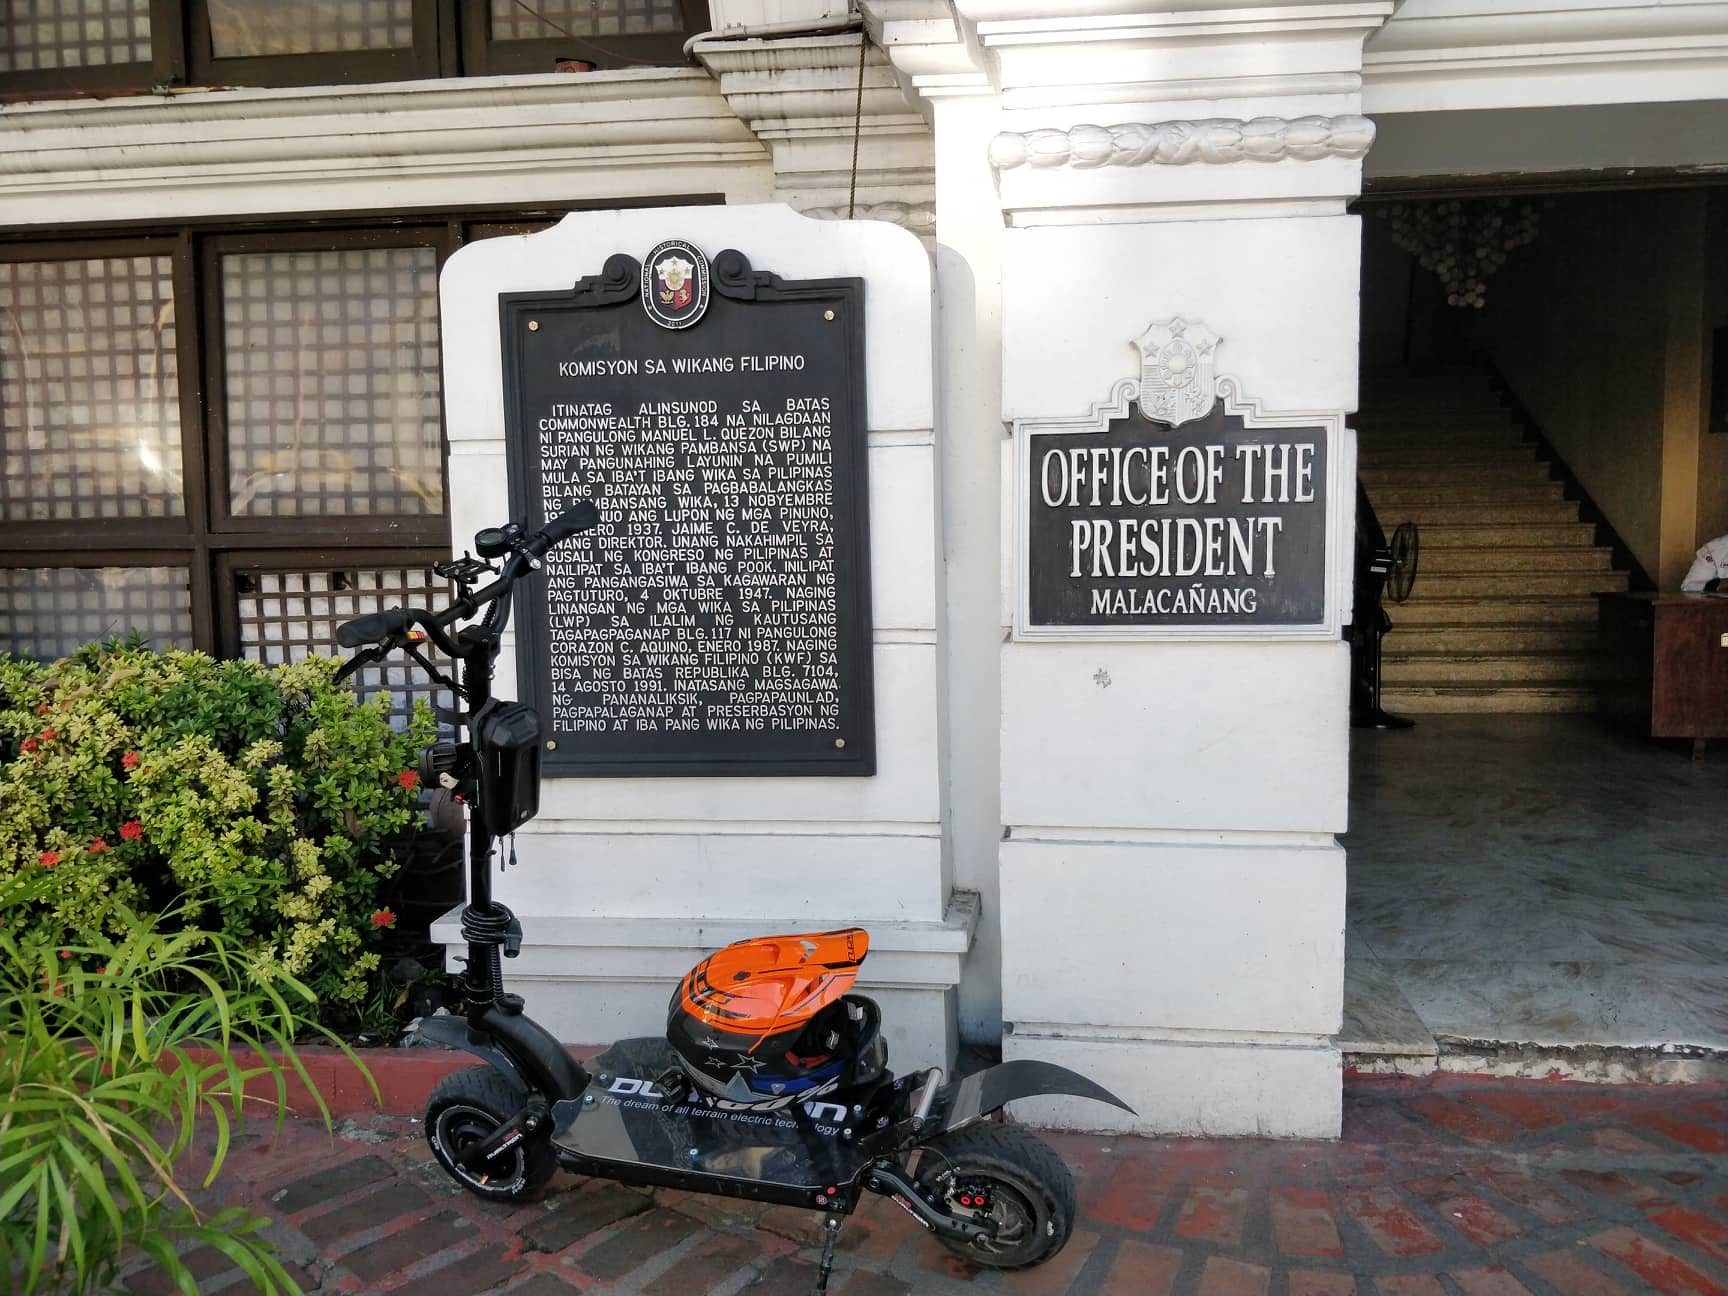 JUST ON TIME. Jaime Limpo arrives at the Malacañang office in one hour at 7:53 am. 